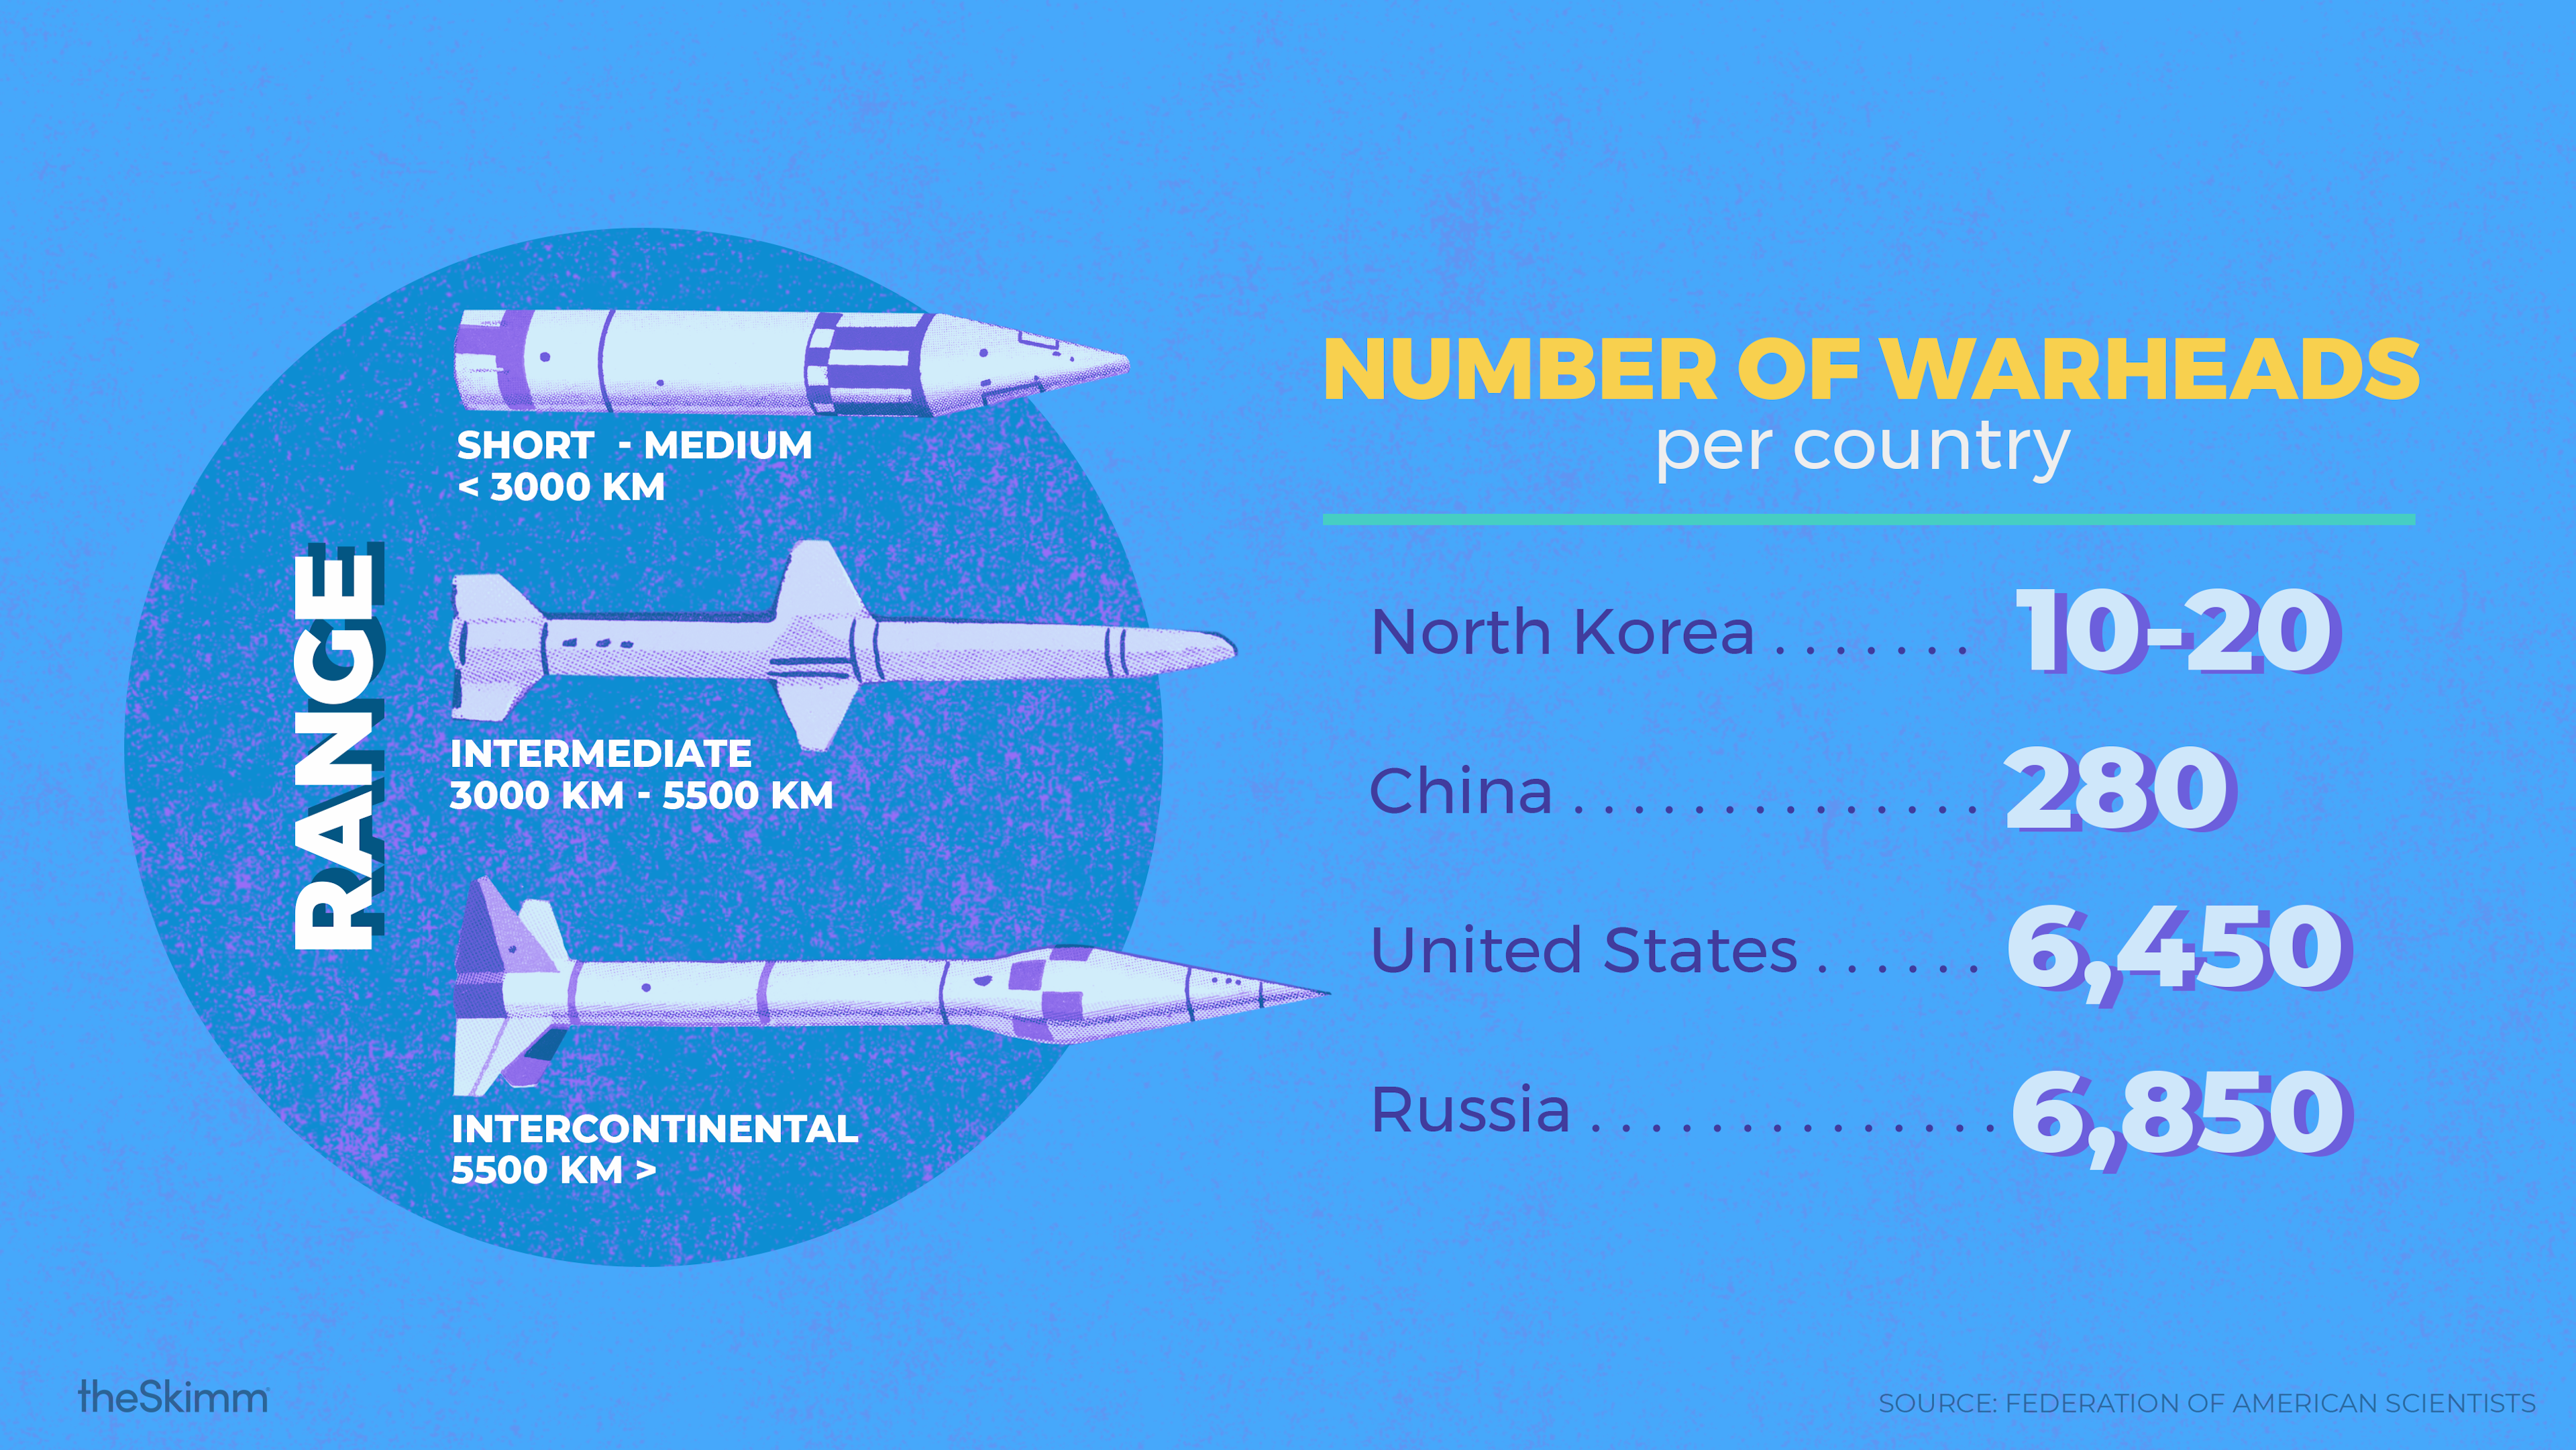 Number of warheads per country: North Korea: 10-20, China: 280, United States: 6,450, Russia: 6,850